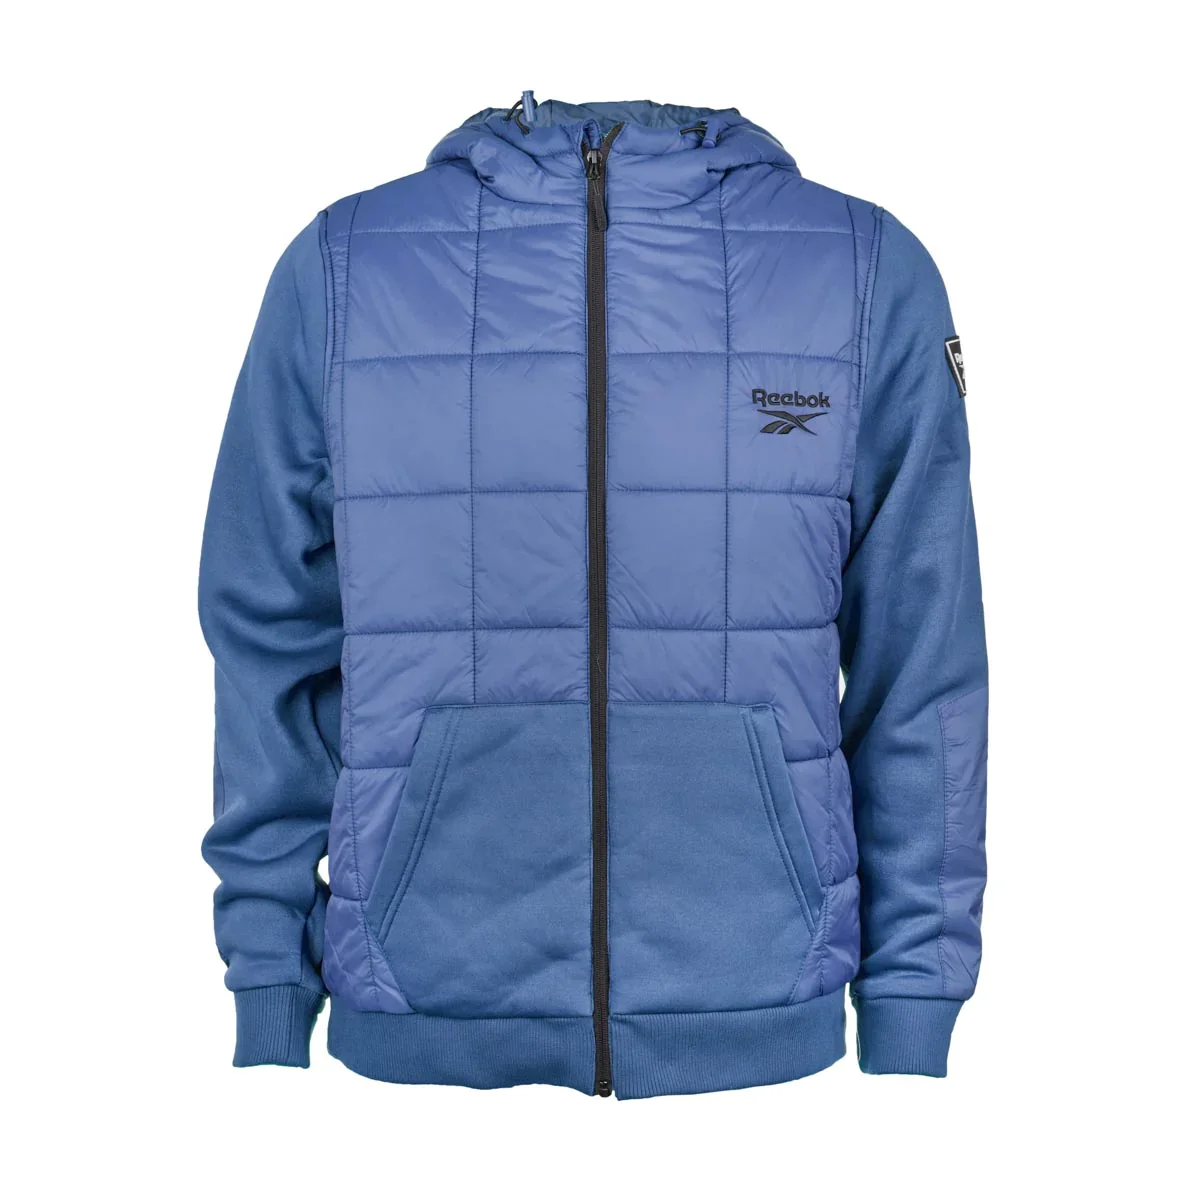 Image of Reebok Men's Mixed Media Jacket with Tricot Sleeve